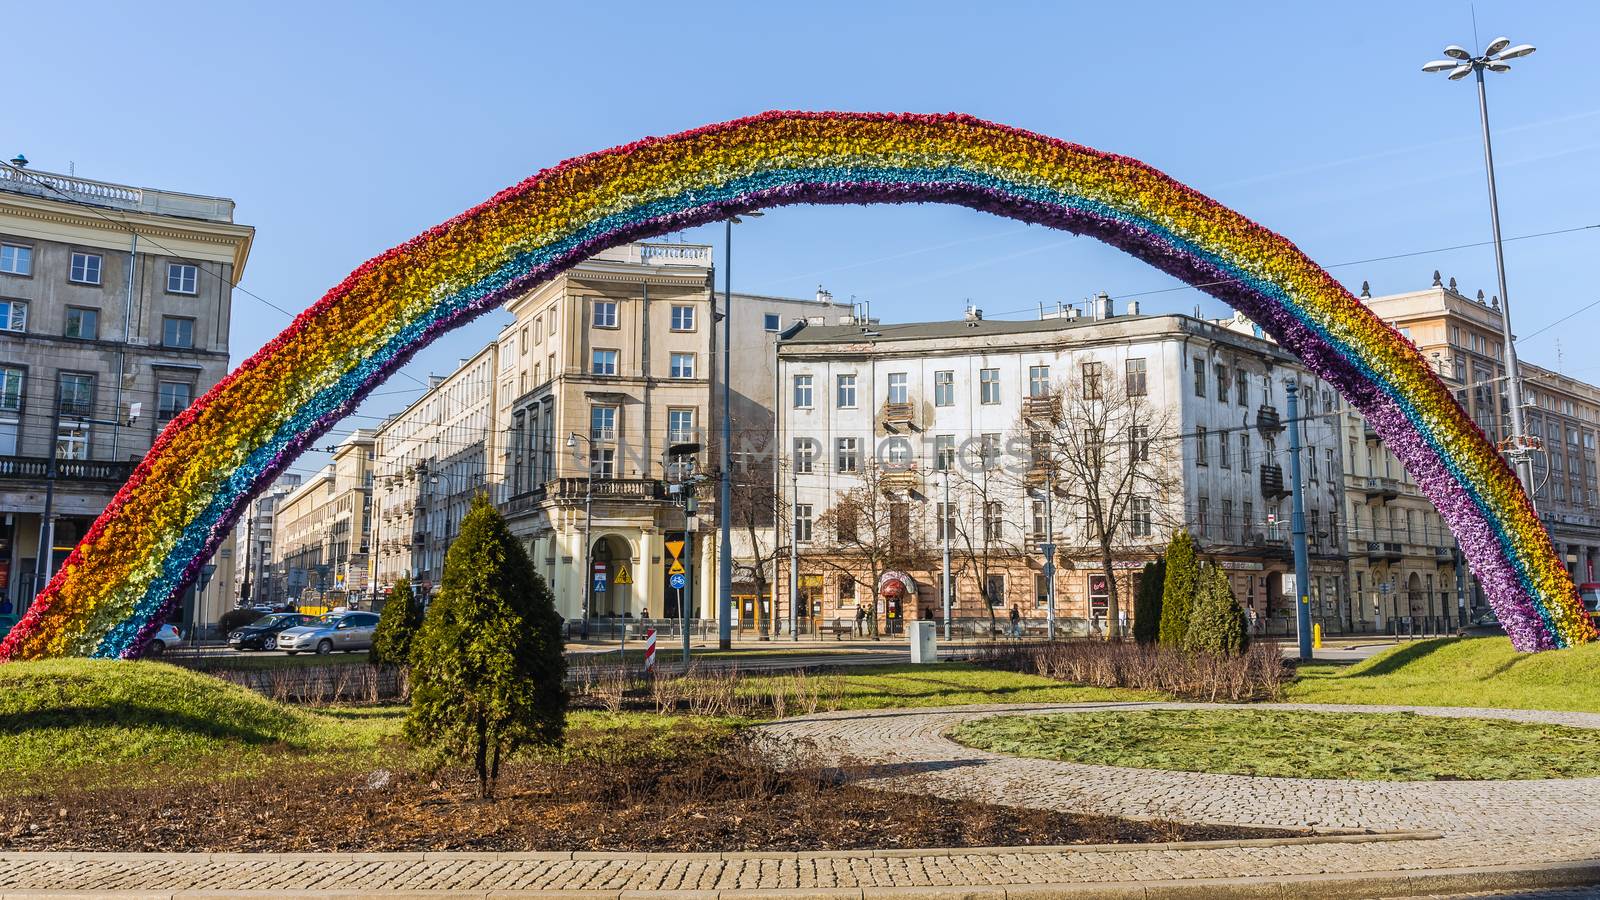 The Rainbow, art installation by Julita Wojcik, considered a symbol of LGBT community. Few times destroyed by right-wing activists, always rebuilt by city authorities.